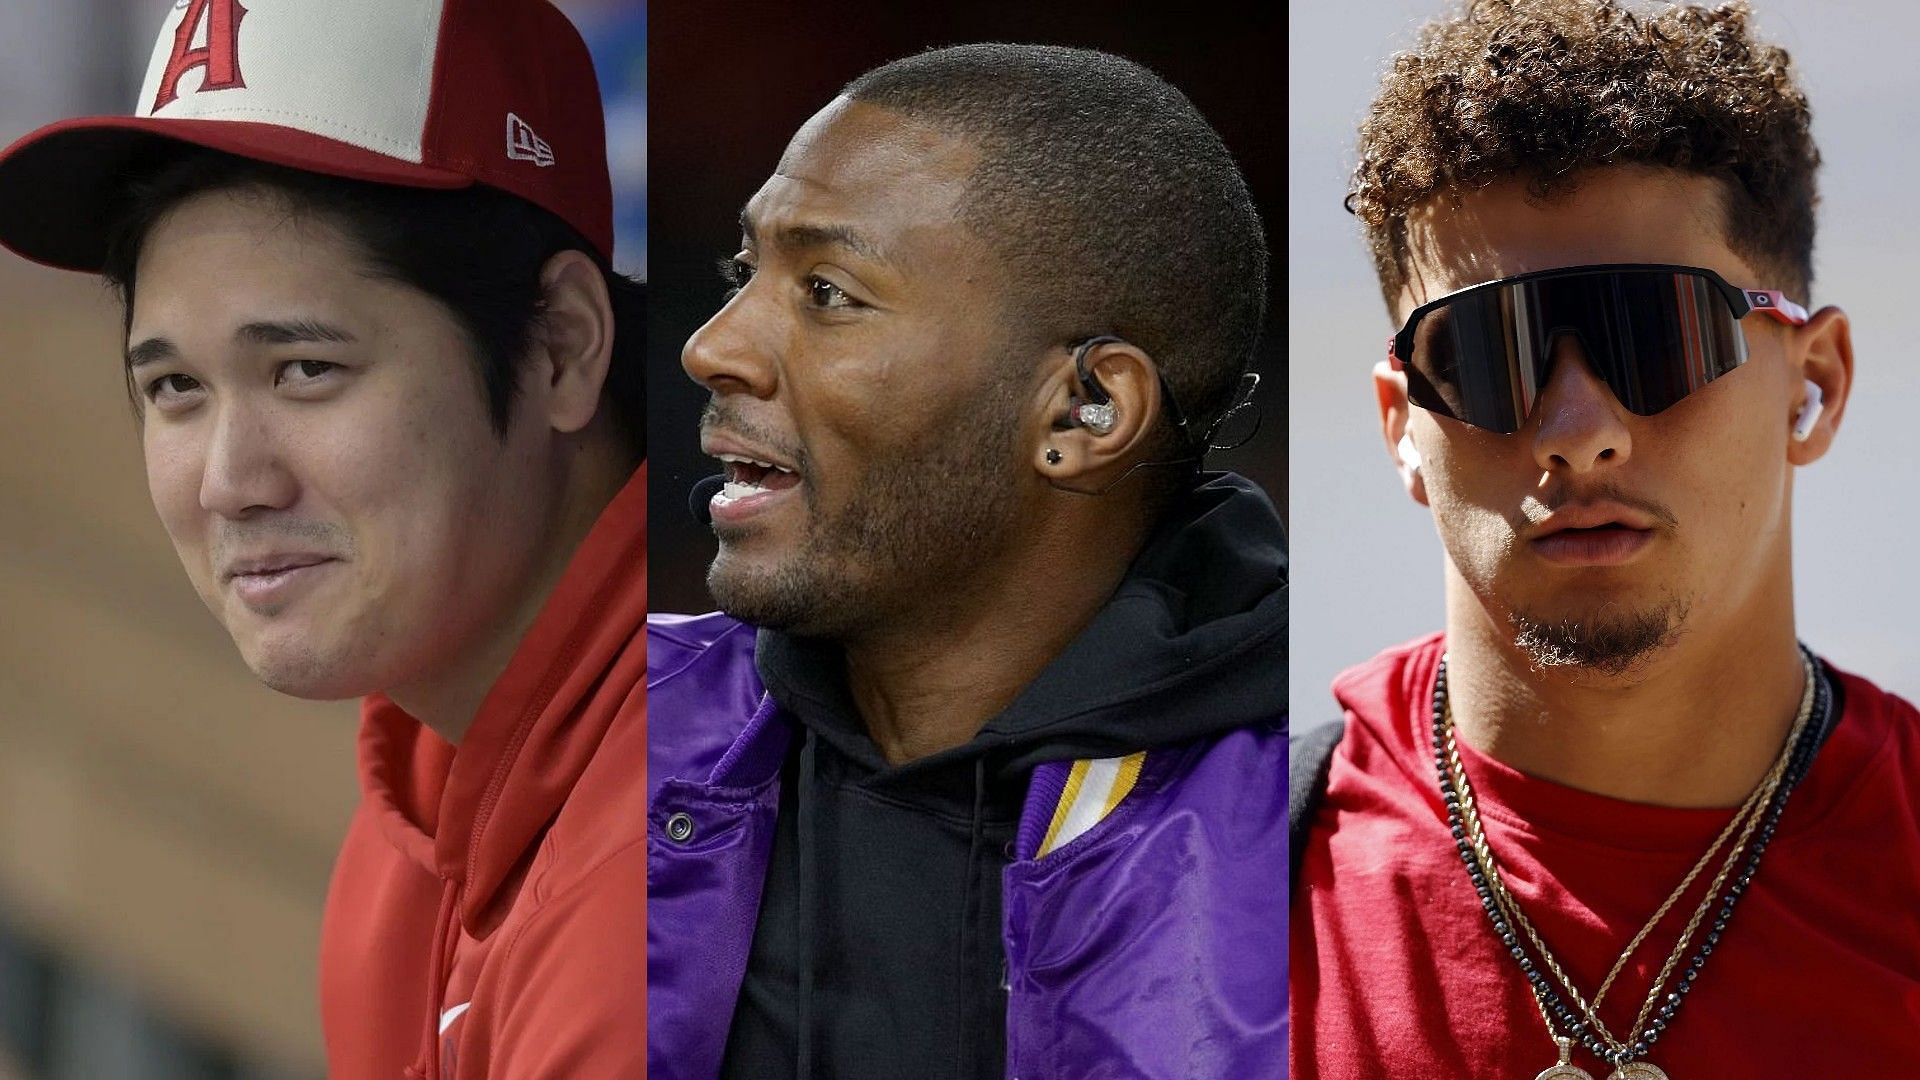 Ryan Clark explains why Patrick Mahomes is getting more coverage than Shohei Ohtani